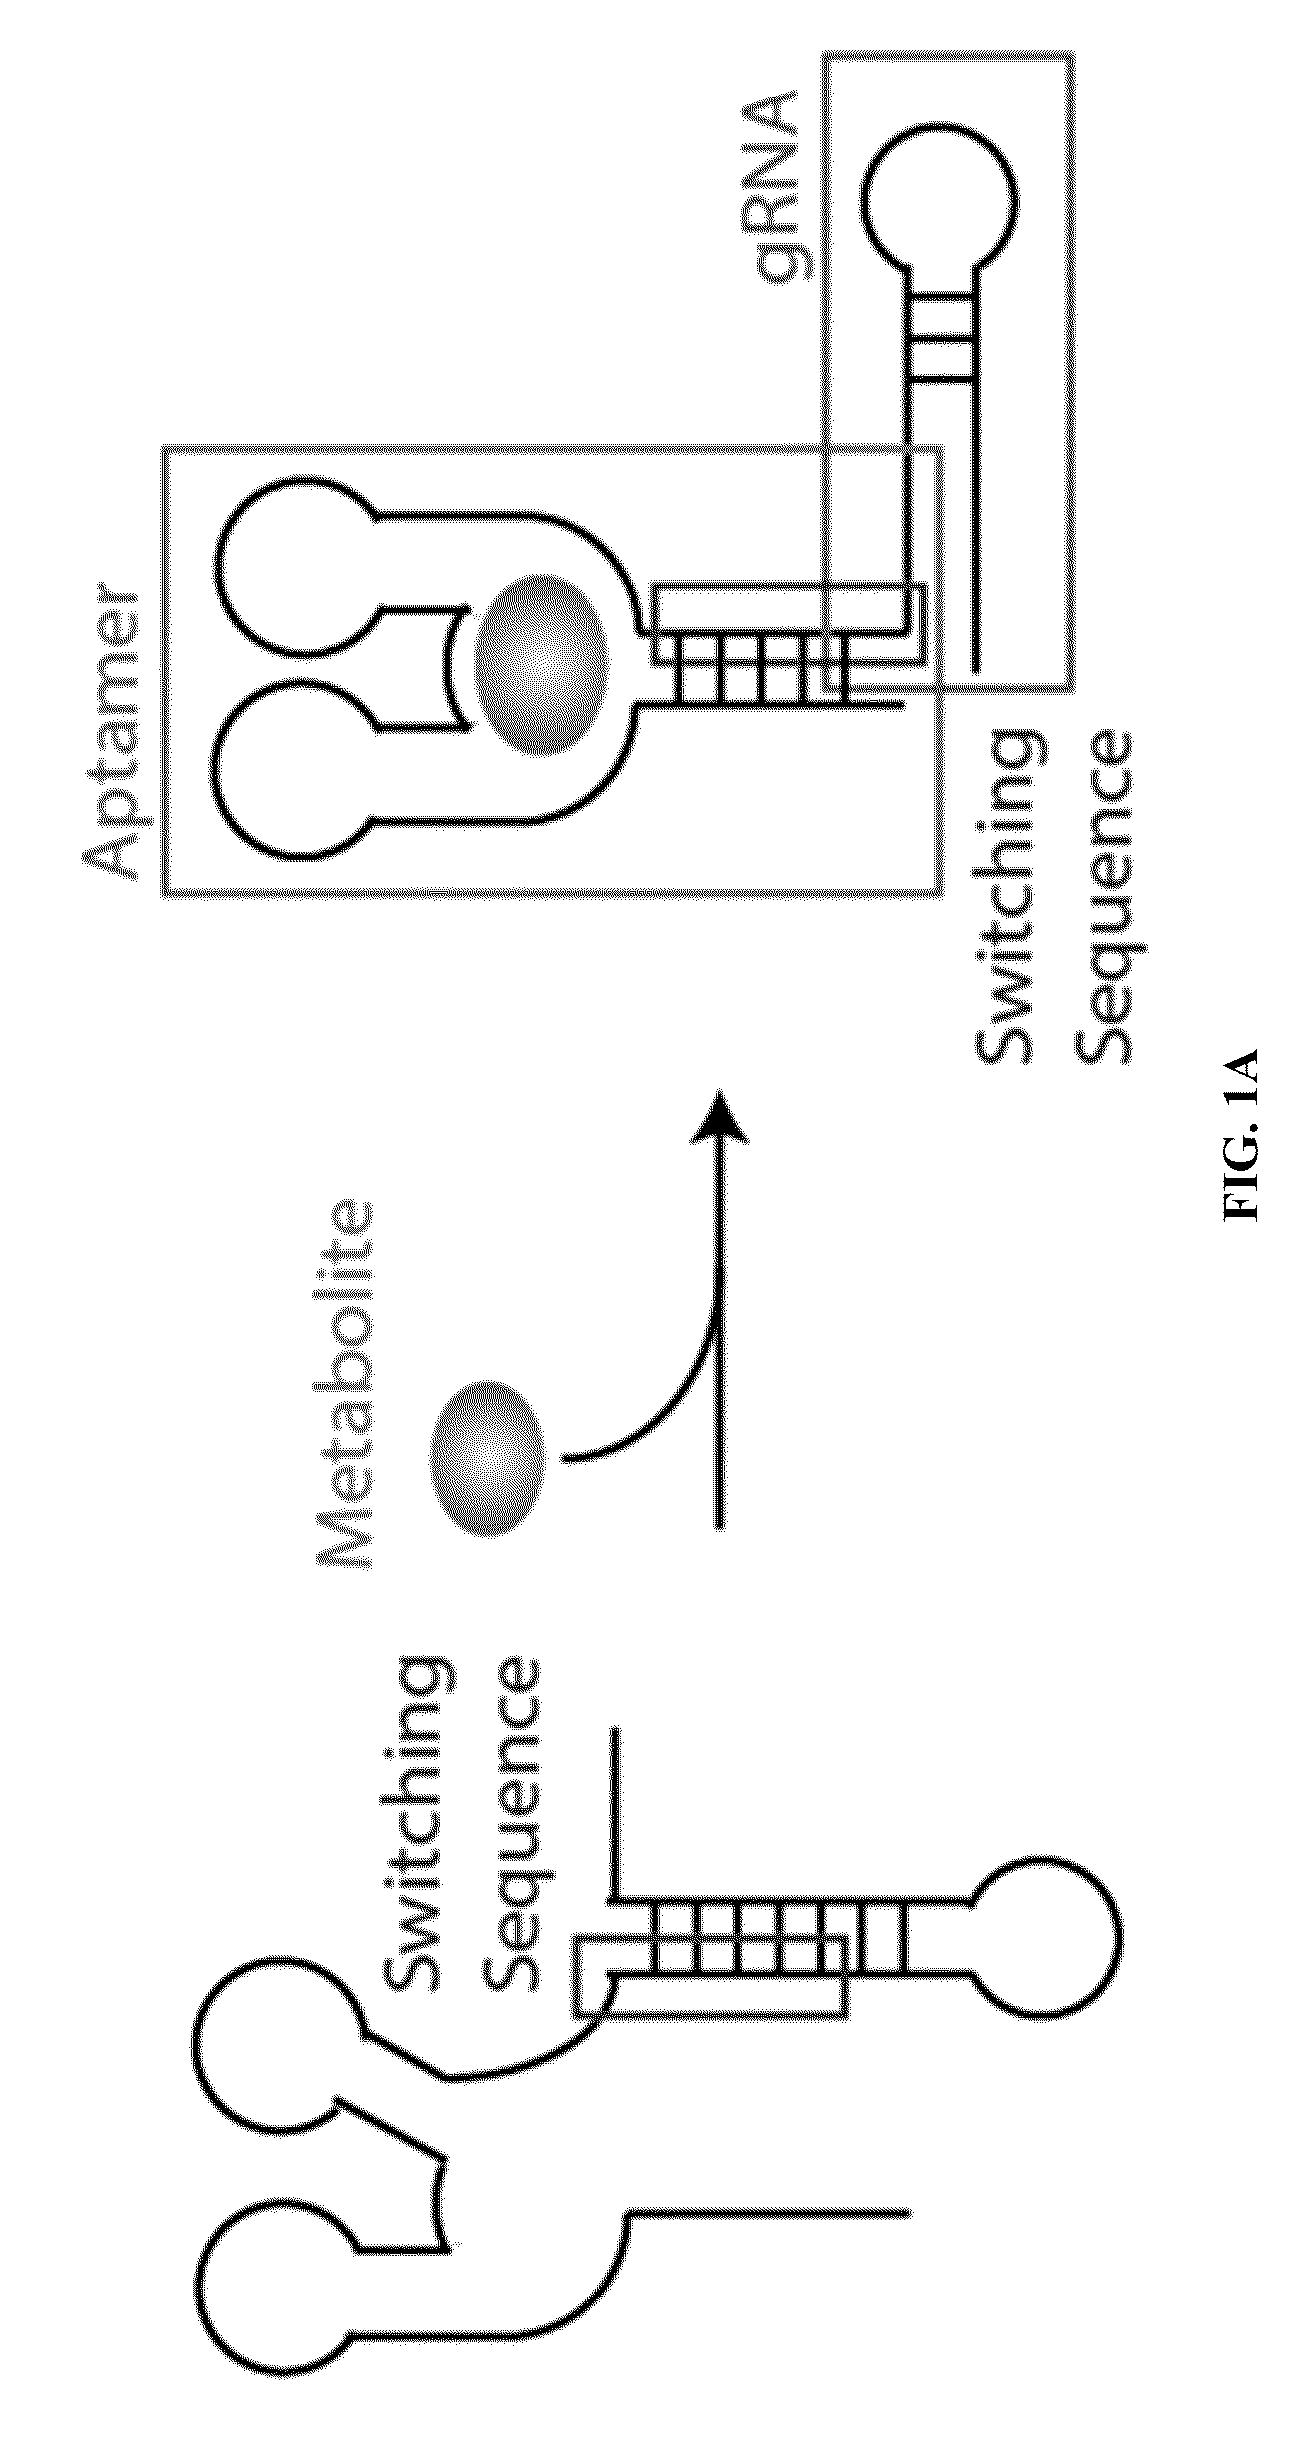 Switchable grnas comprising aptamers